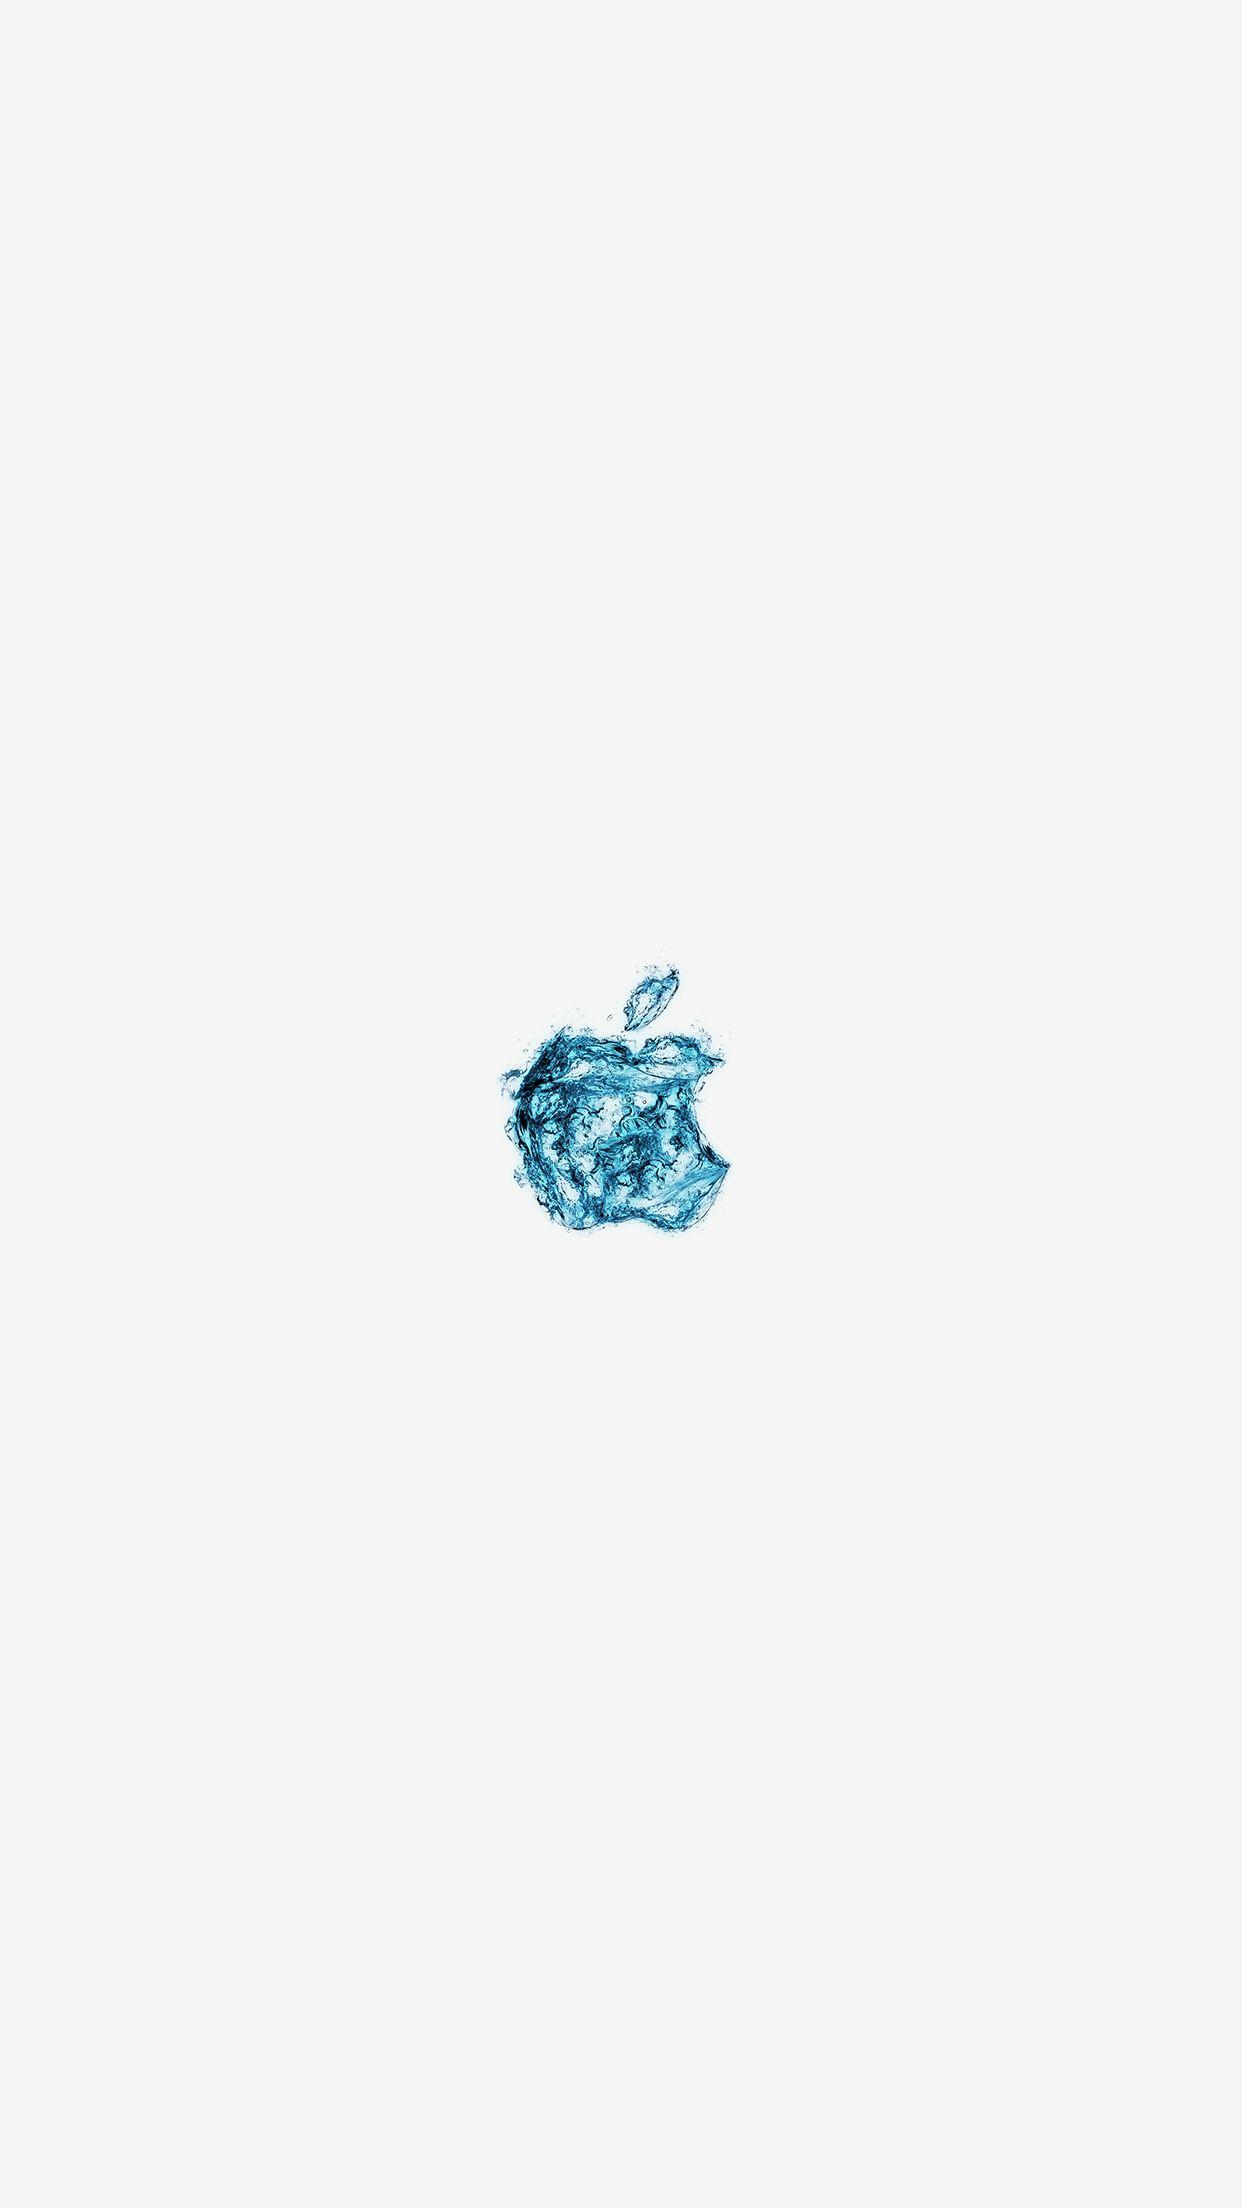 White and Blue Apple Logo - iPhone7papers.com | iPhone7 wallpaper | at08-apple-logo-water-white ...